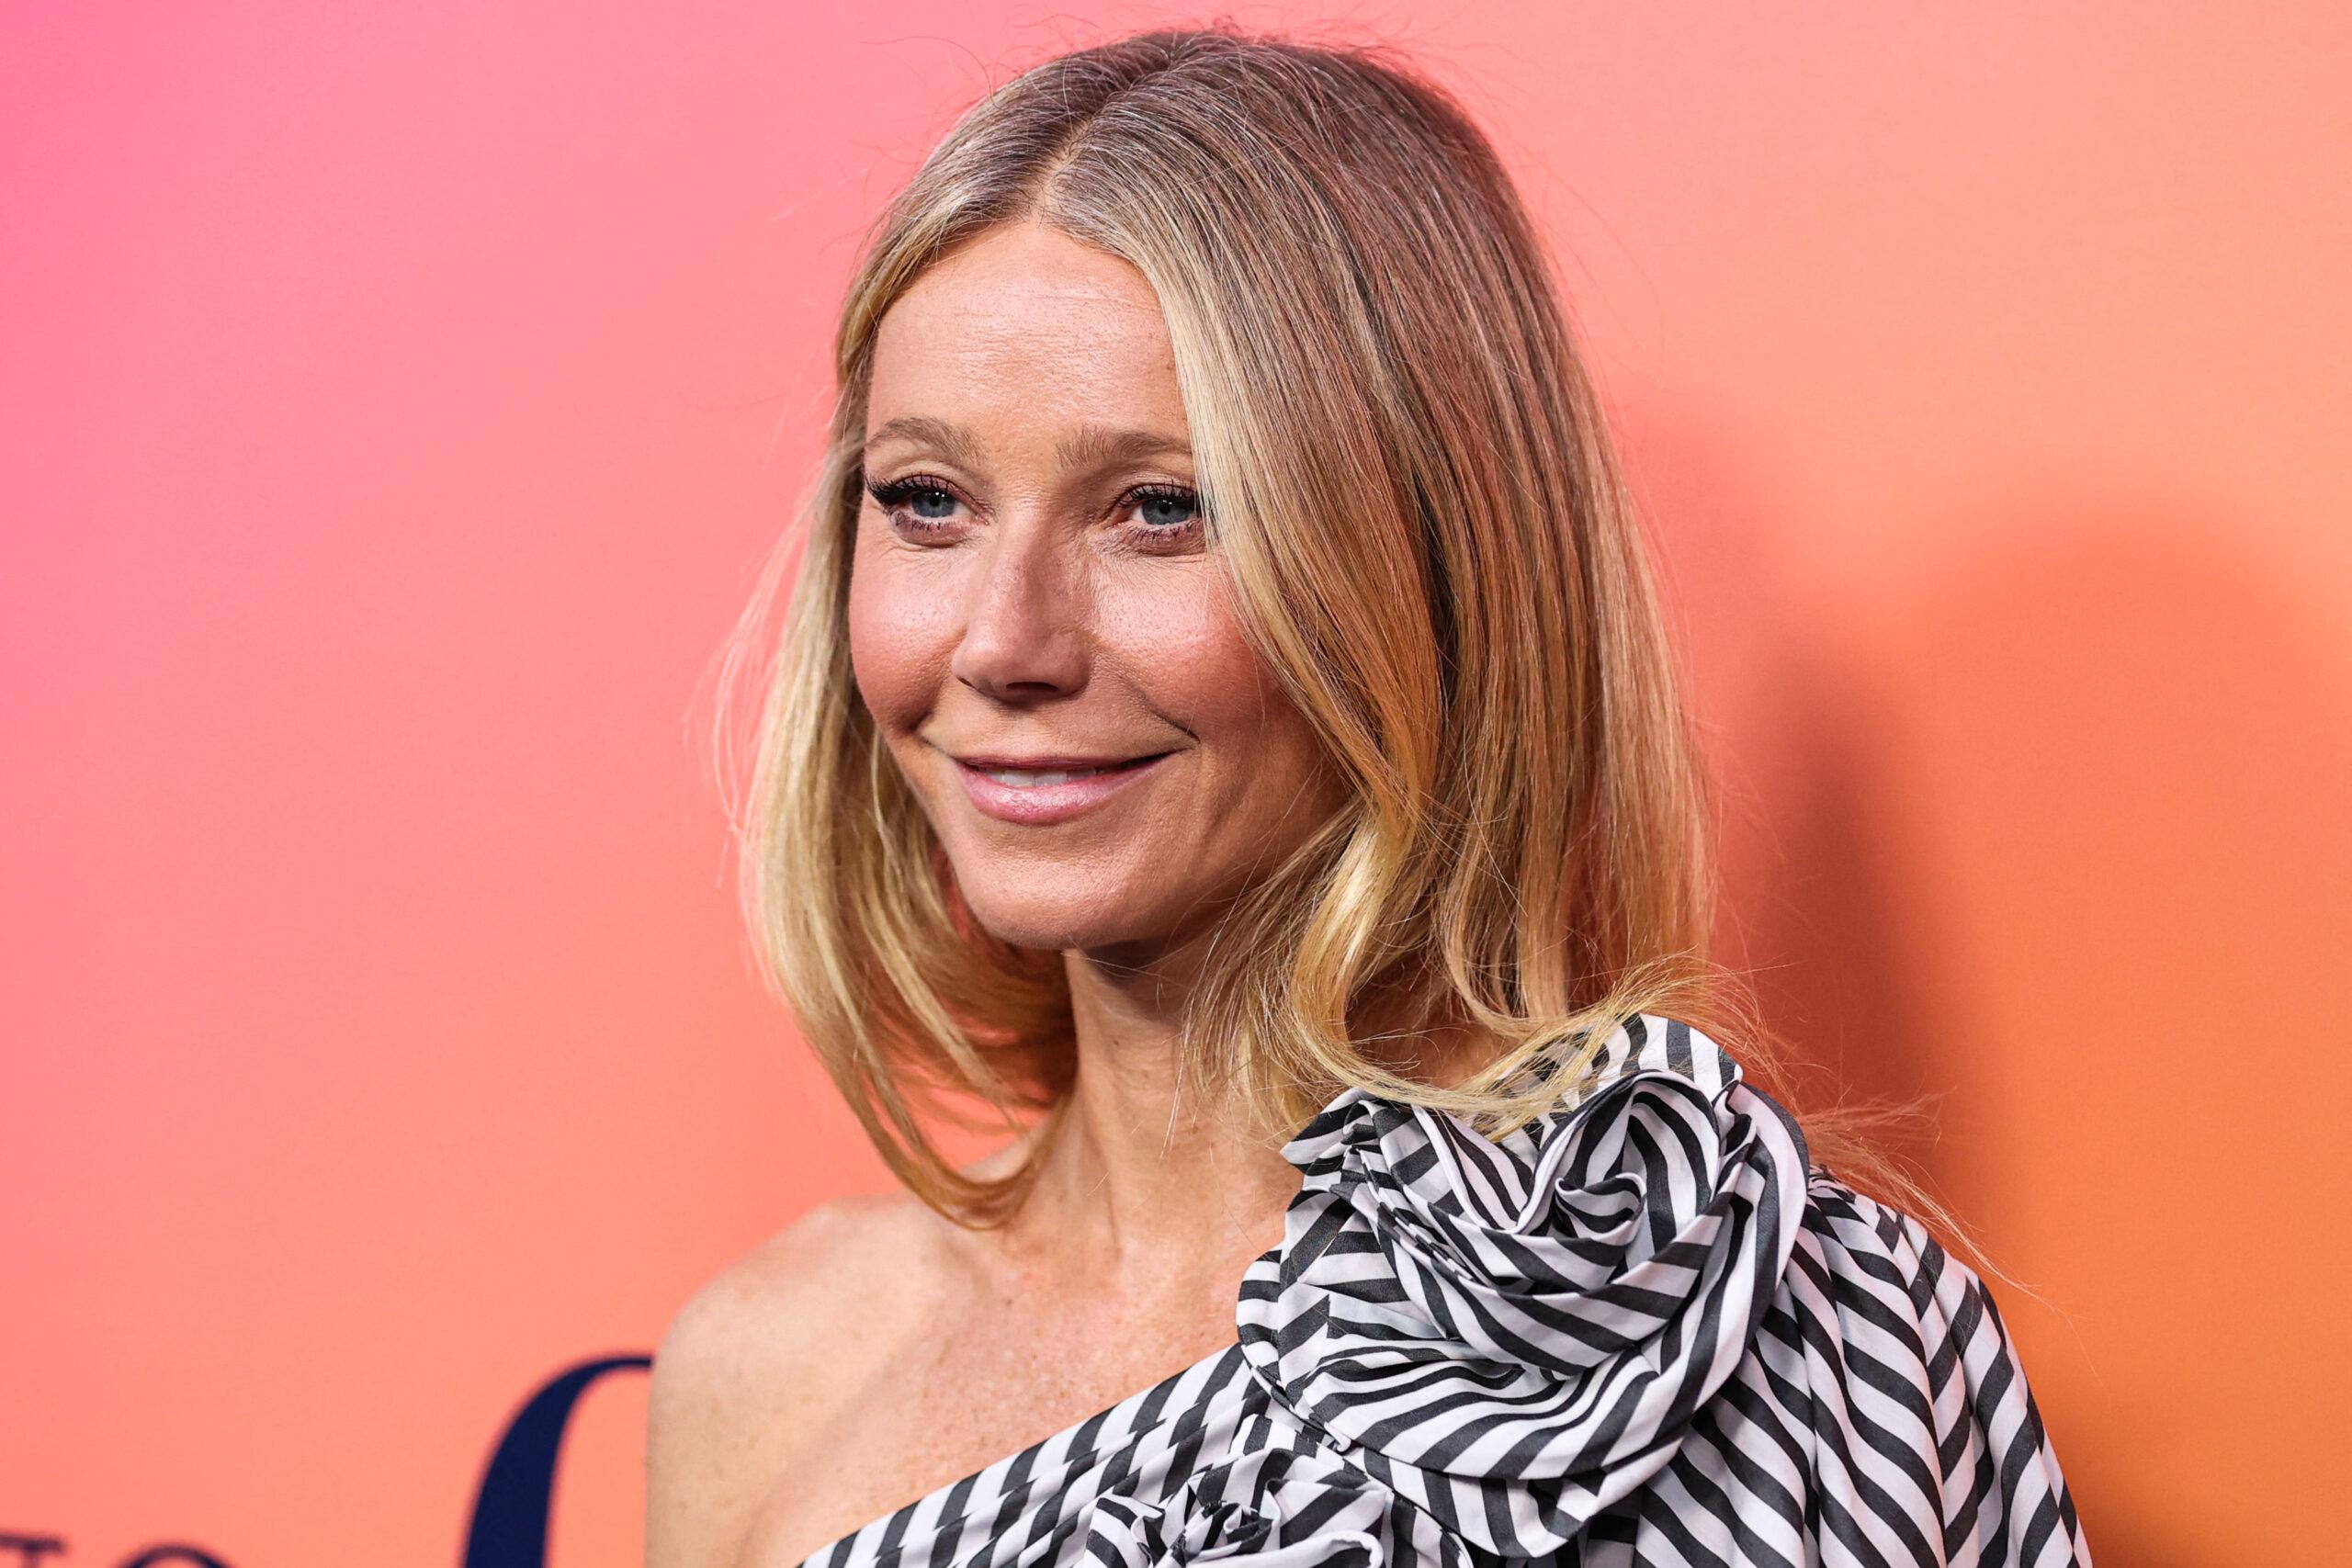 Gwyneth Paltrow at Veuve Clicquot 250th Anniversary Solaire Culture Exhibition Opening